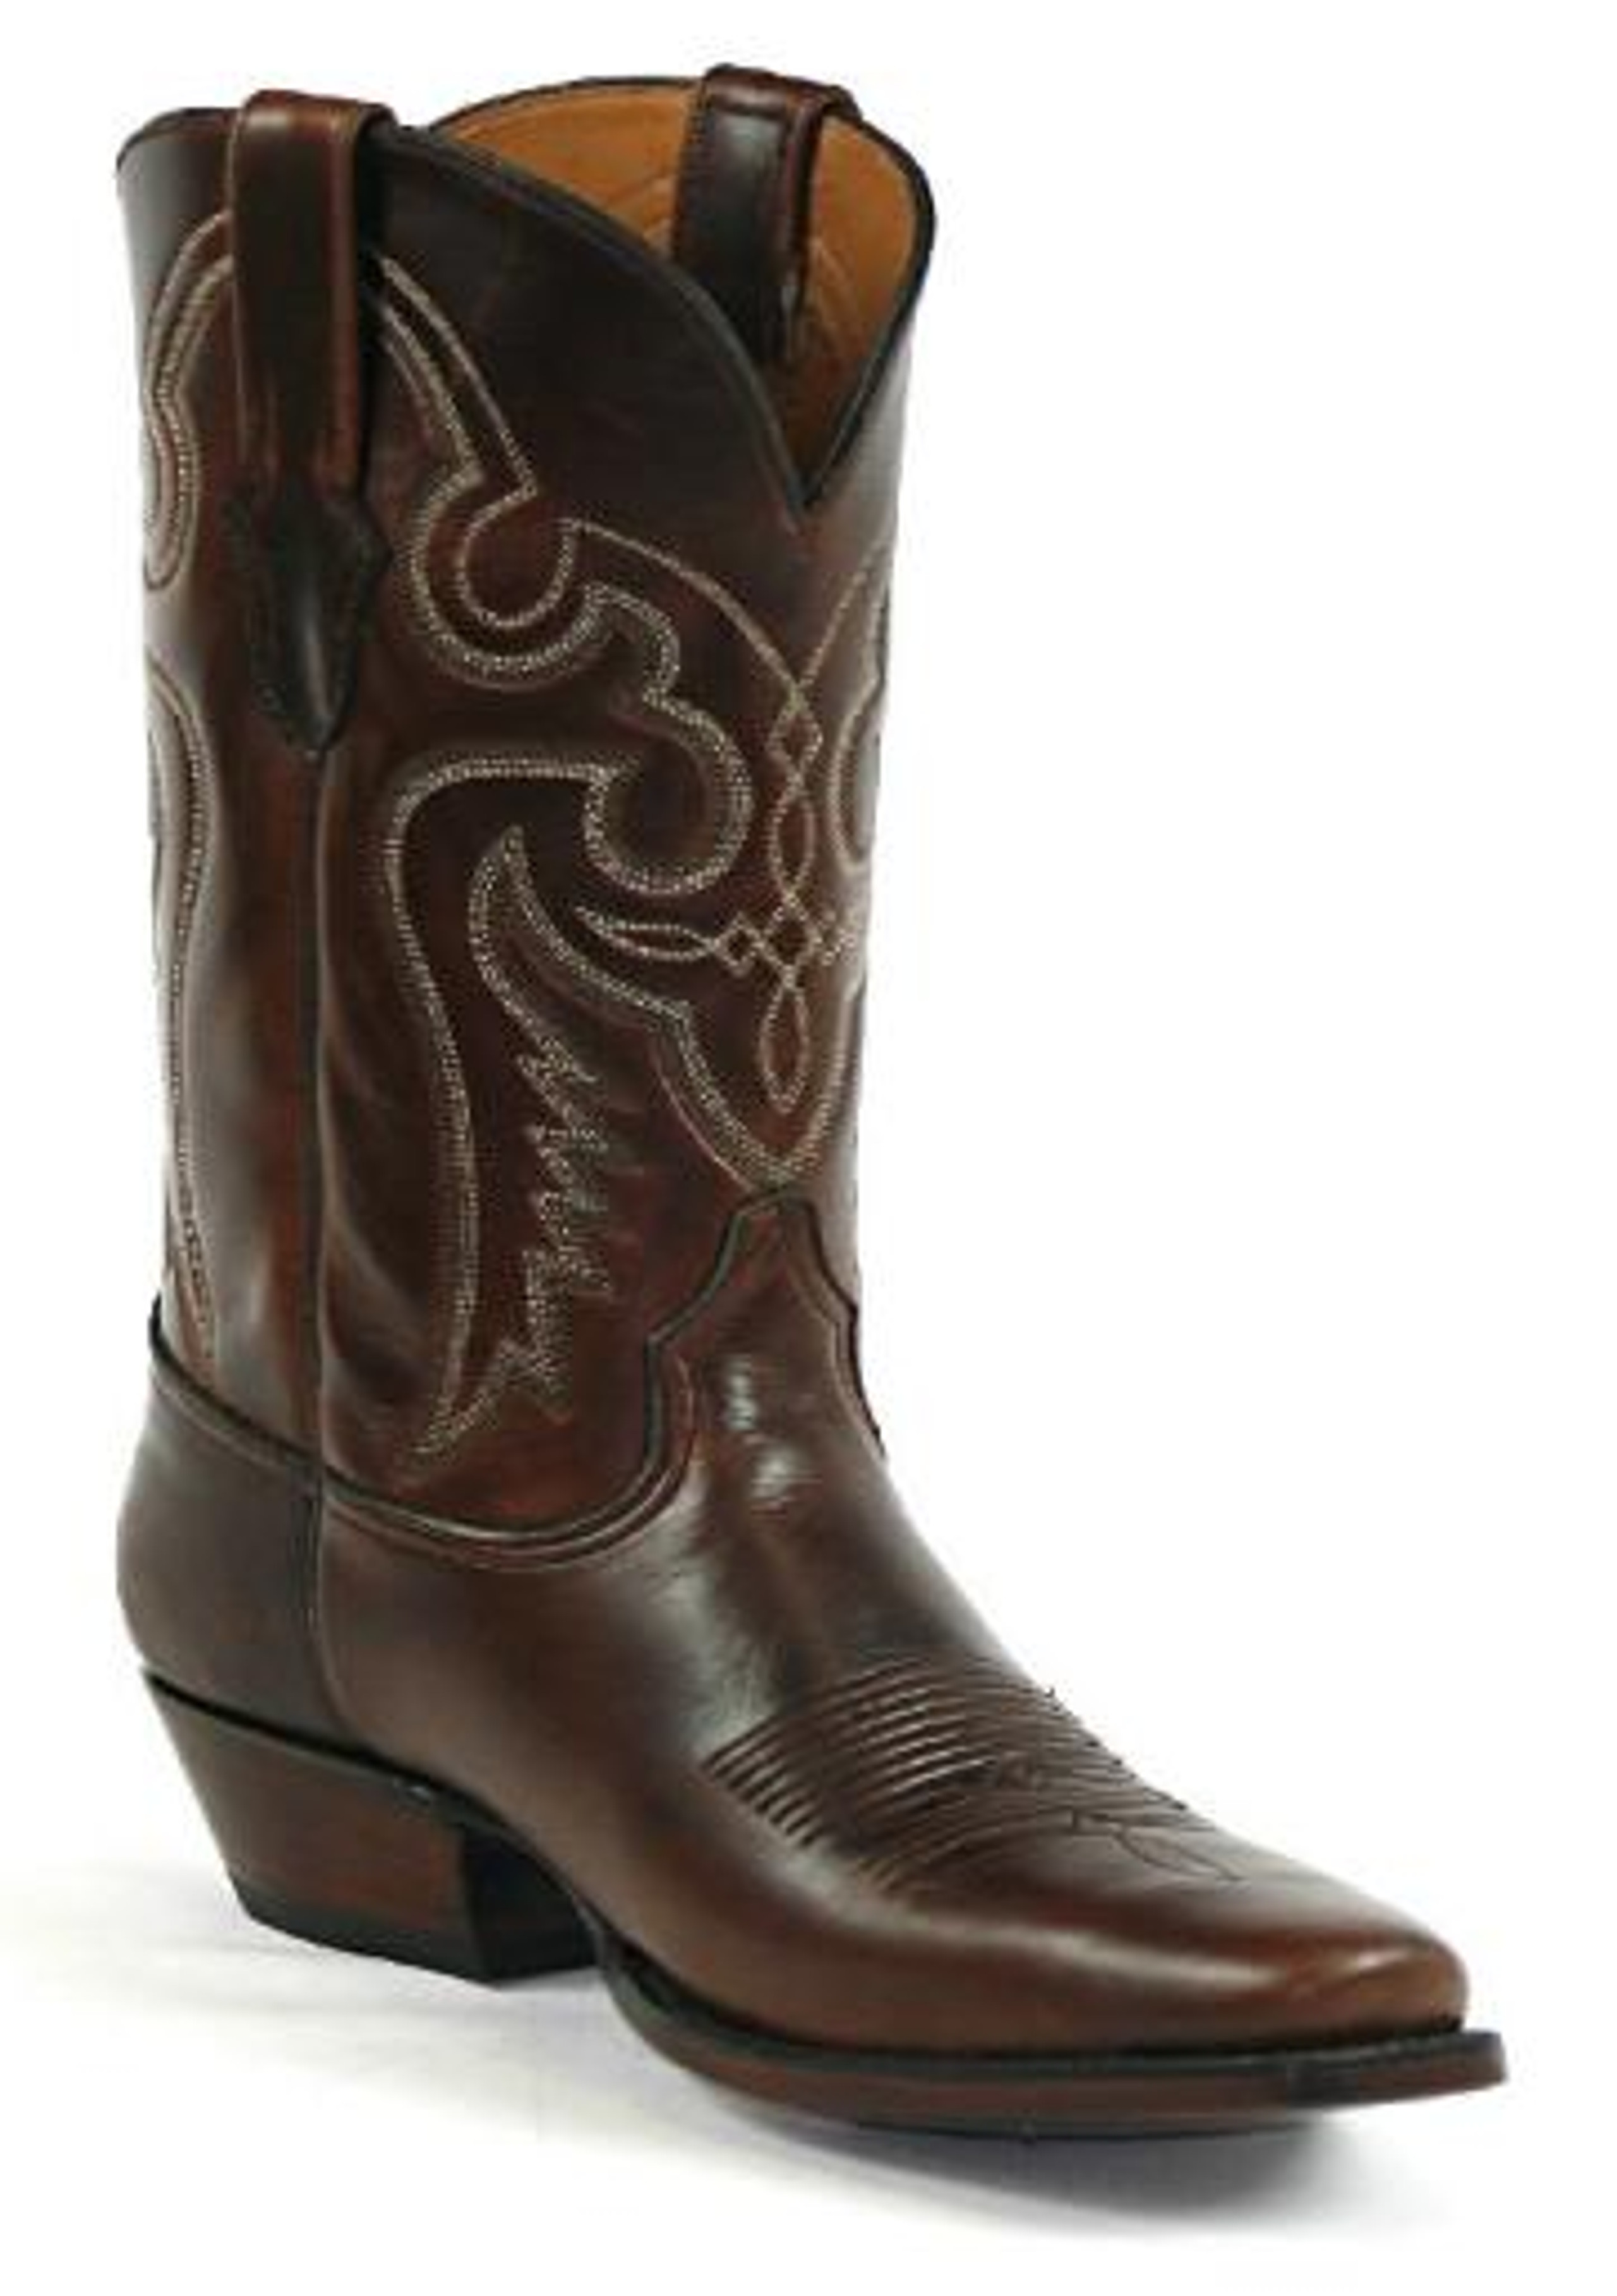 Black Jack Excell Sombra Cowboy Boots (Oiled Calf) - Tim's Boots